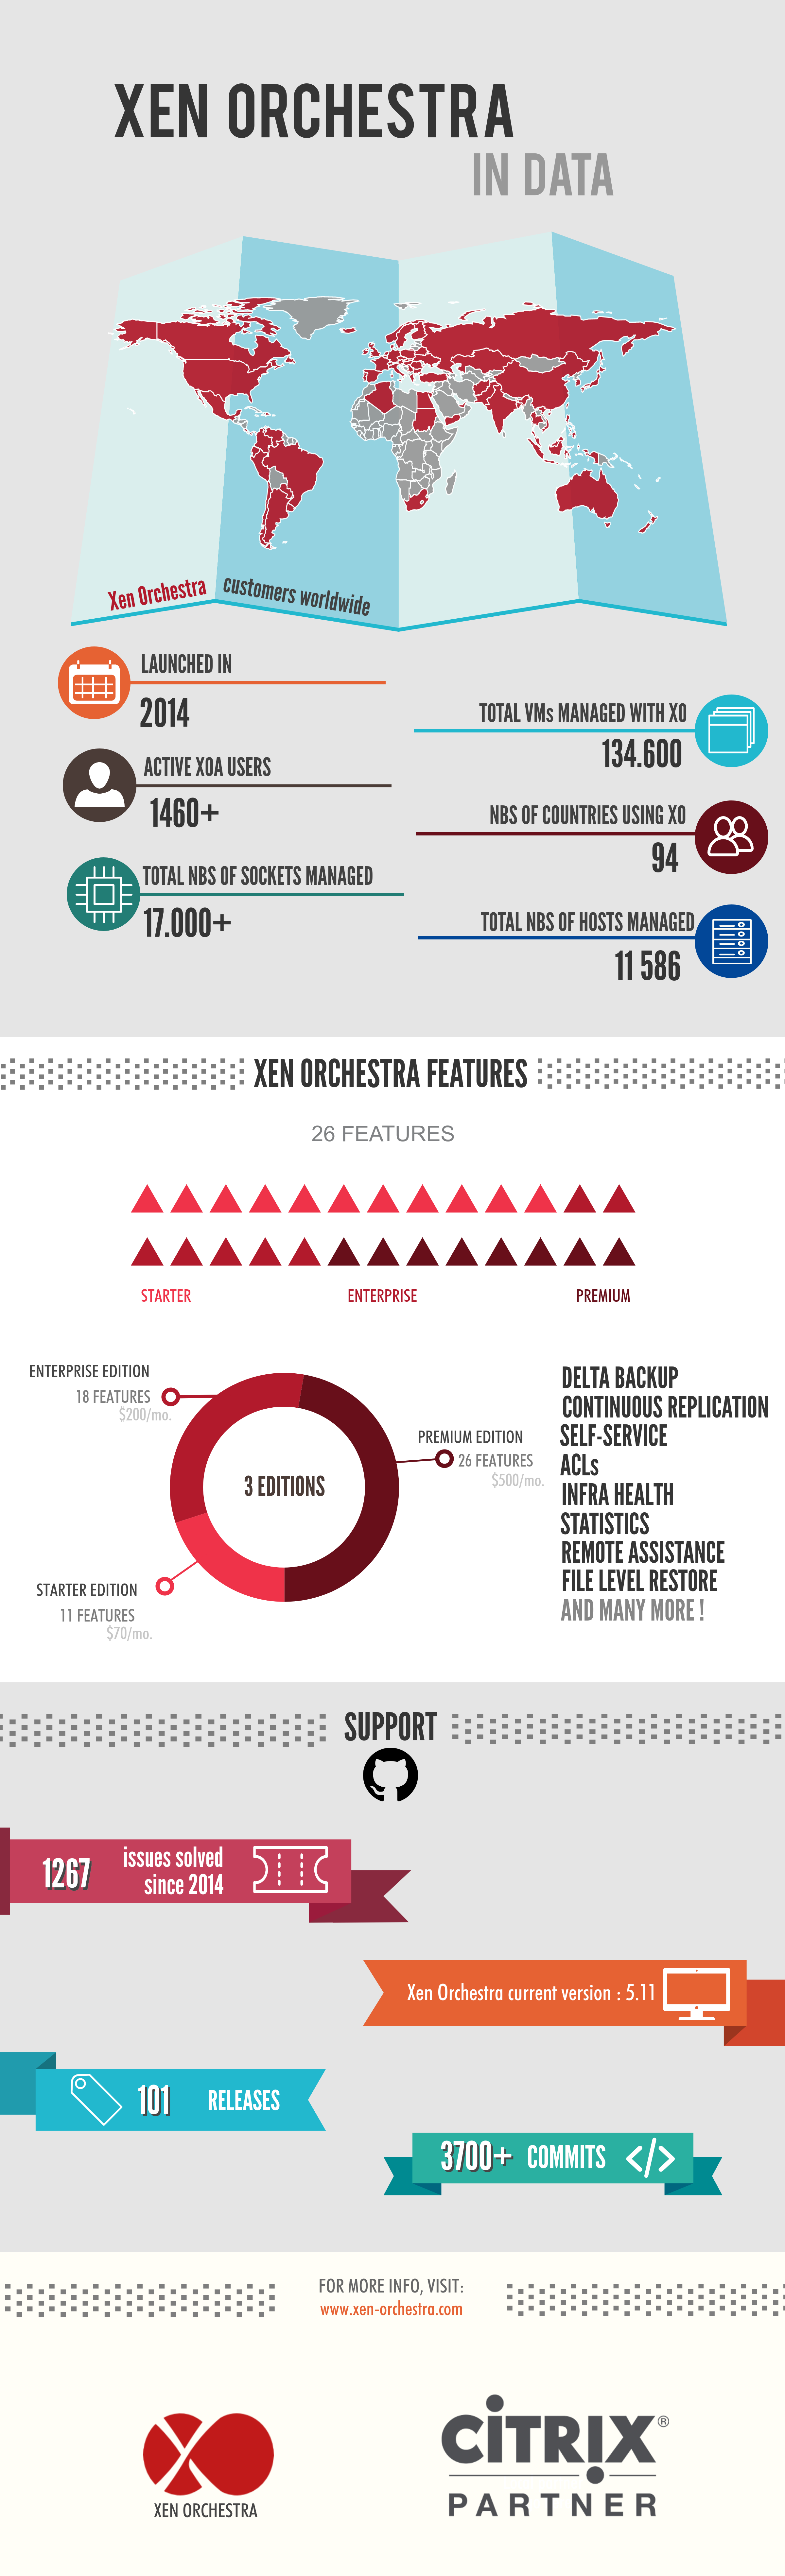 Some data about Xen Orchestra